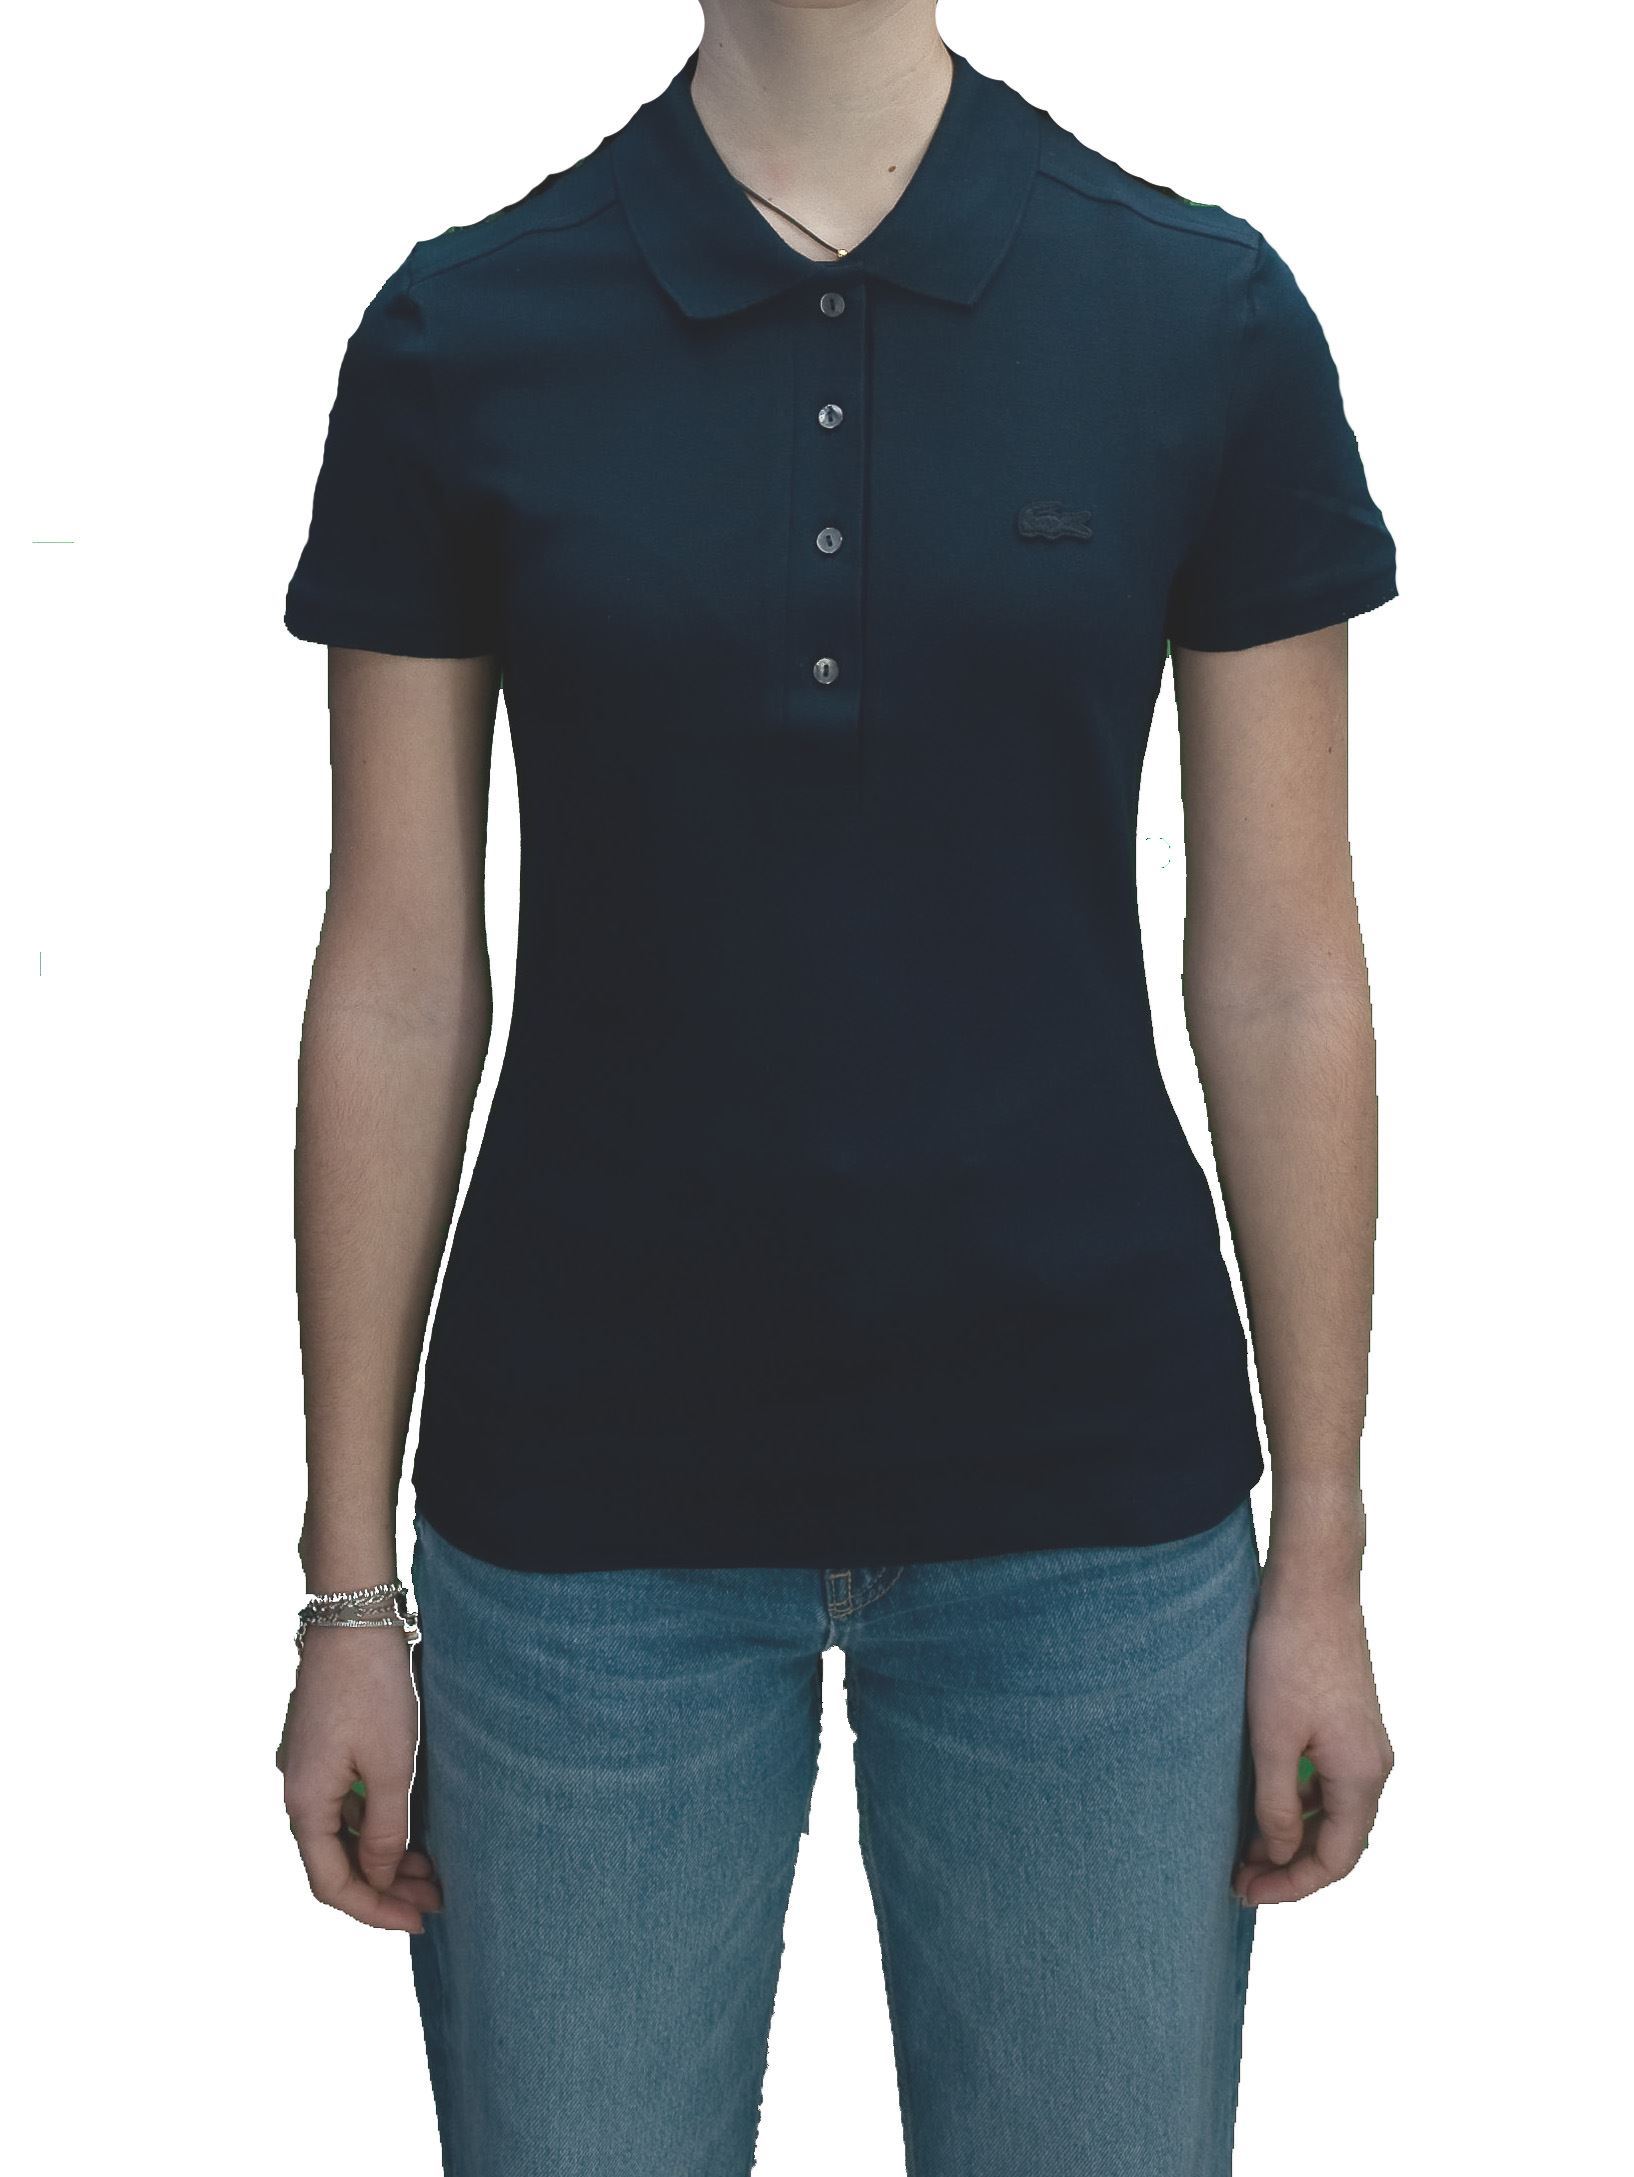 Picture of Blue women's polo shirt